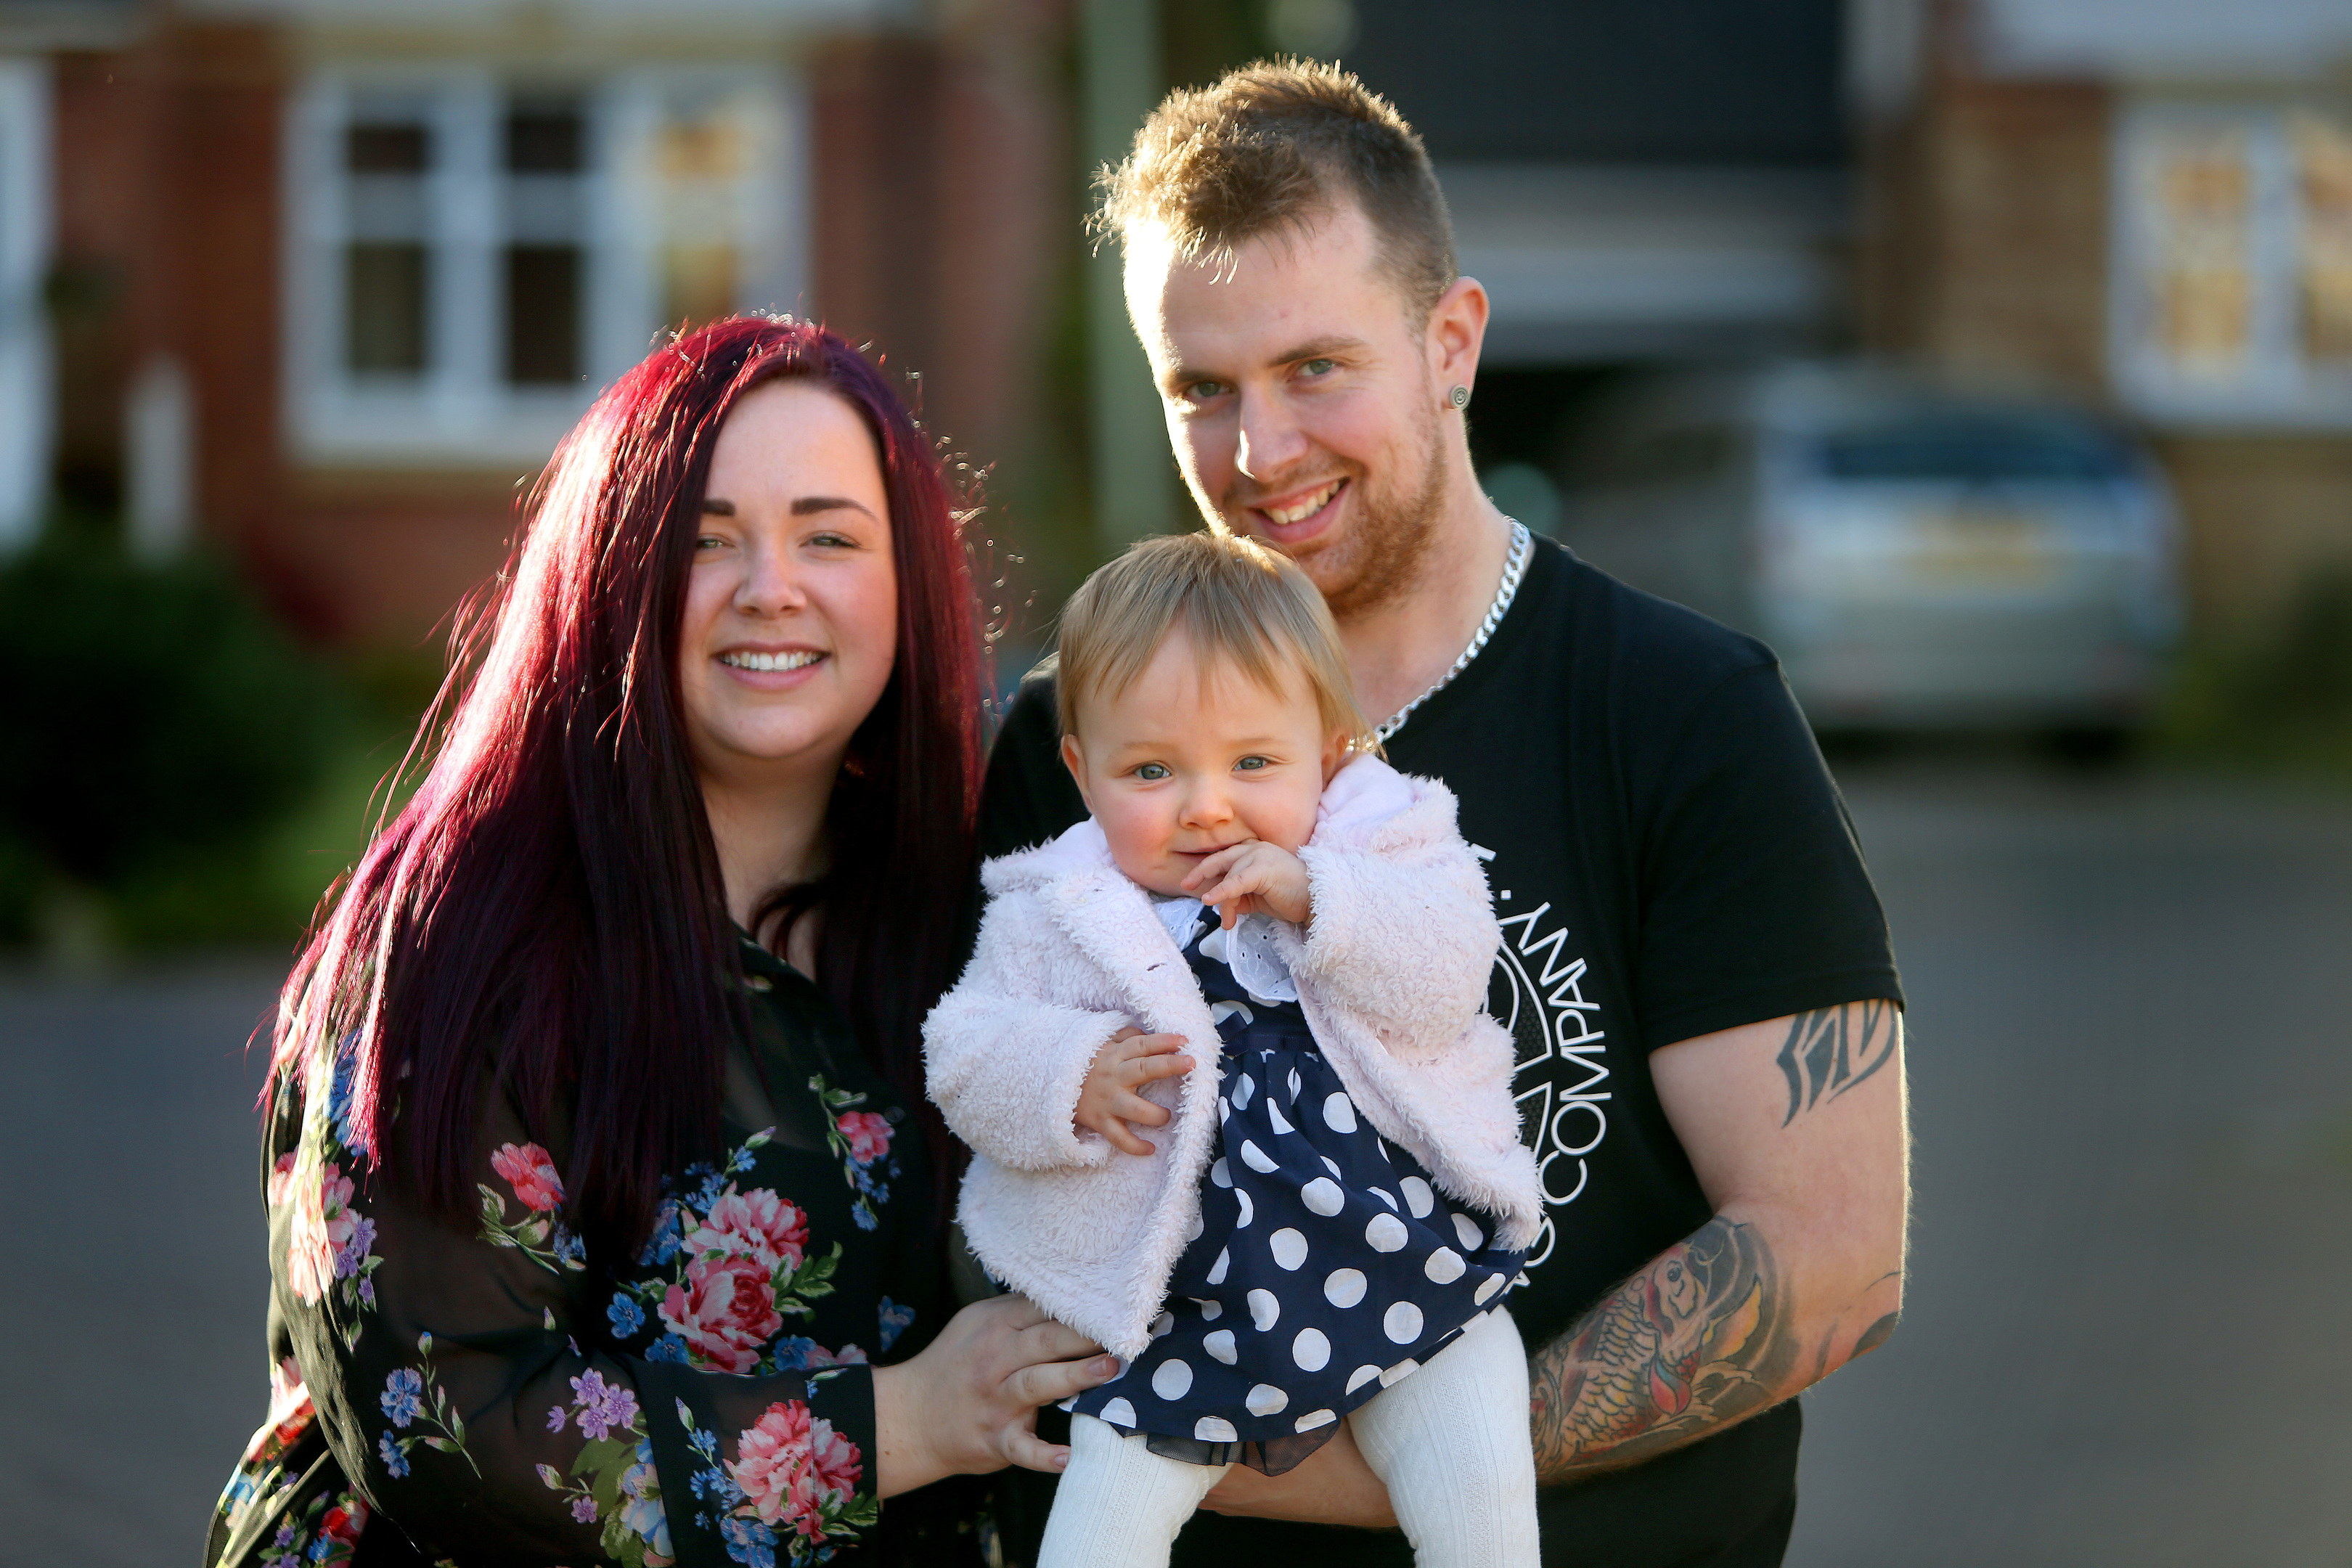 Ashleigh wants to repay the staff who helped her, her partner Gordon and daughter Layla last Christmas.